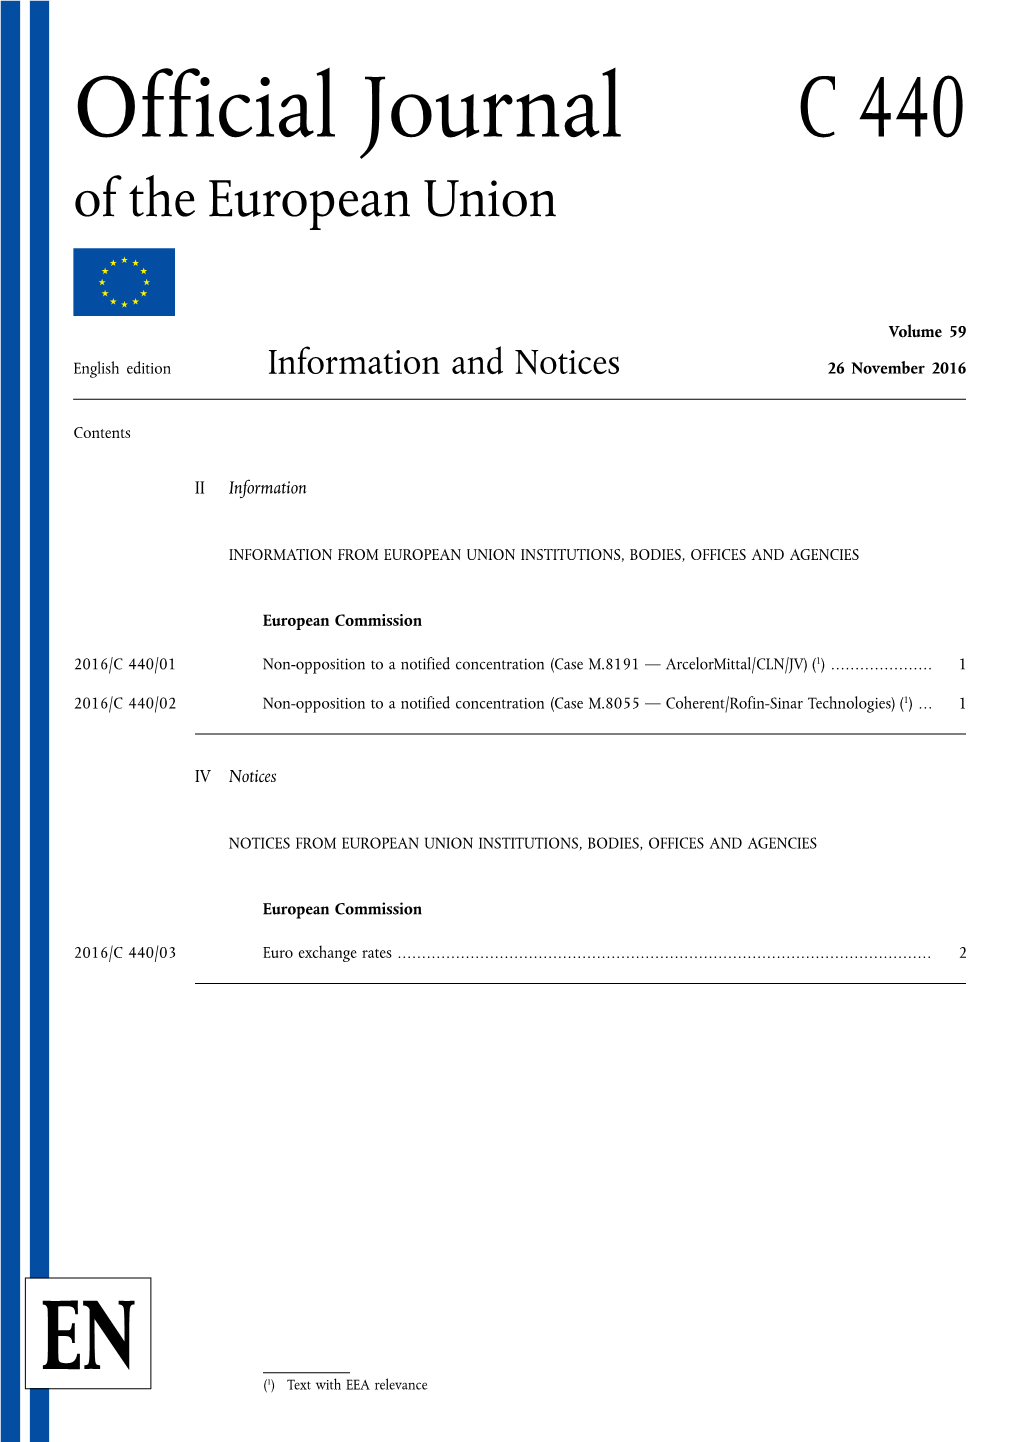 Official Journal C 440 of the European Union